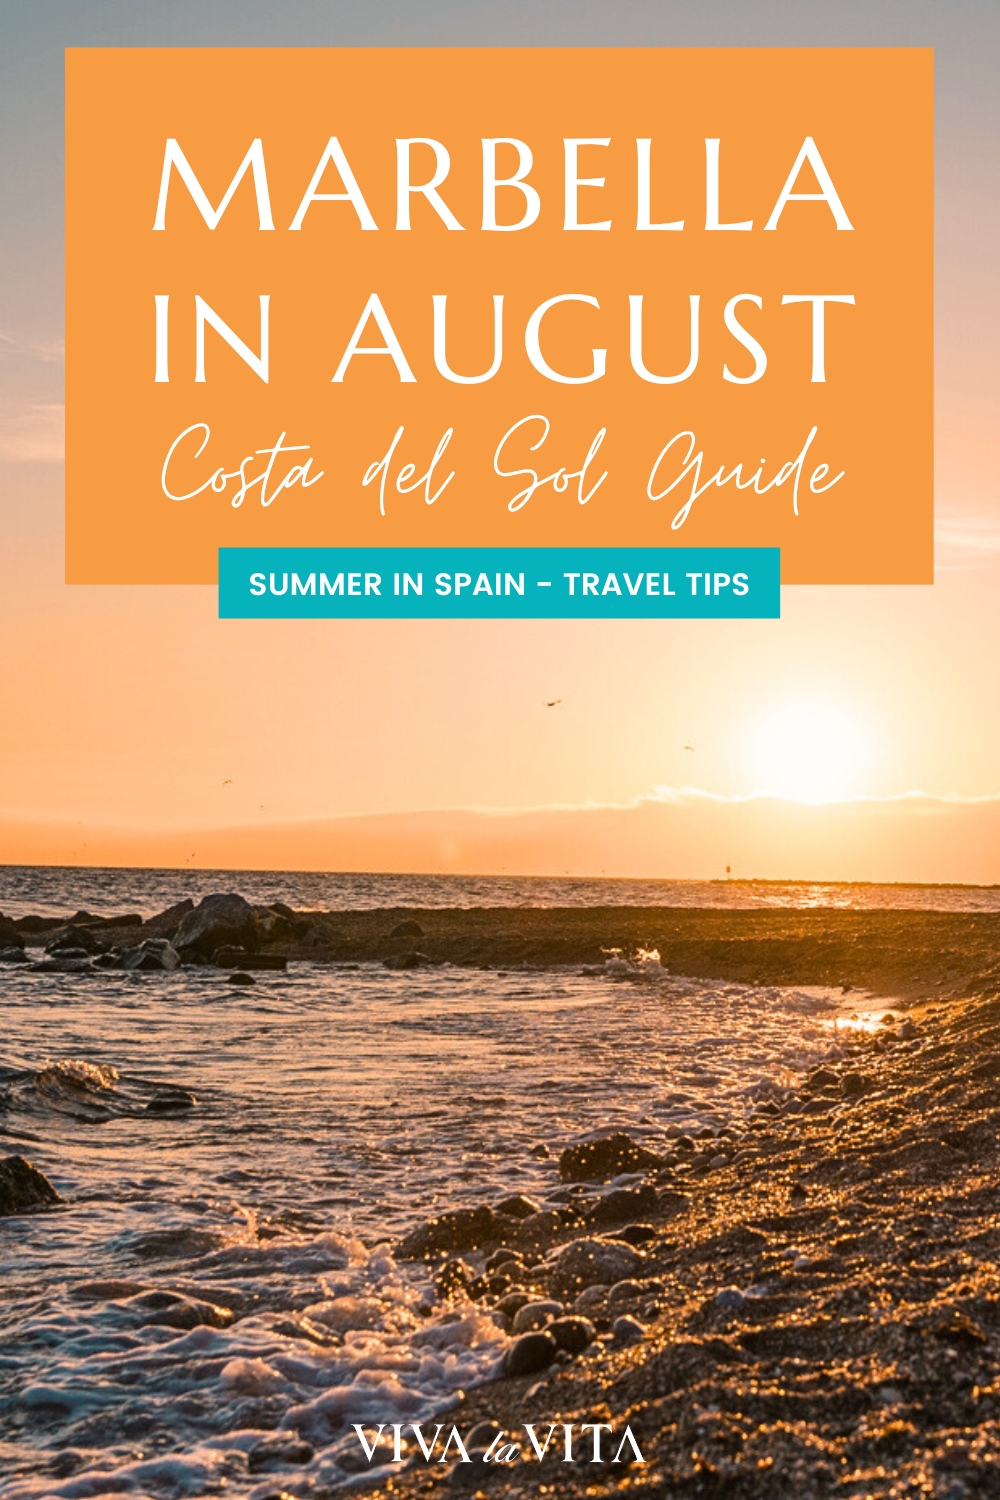 Pinterest image showing a beach in Marbella on Costa del Sol with a headline that reads: marbella in August - costa del sol guide, summer in spain - travel tips